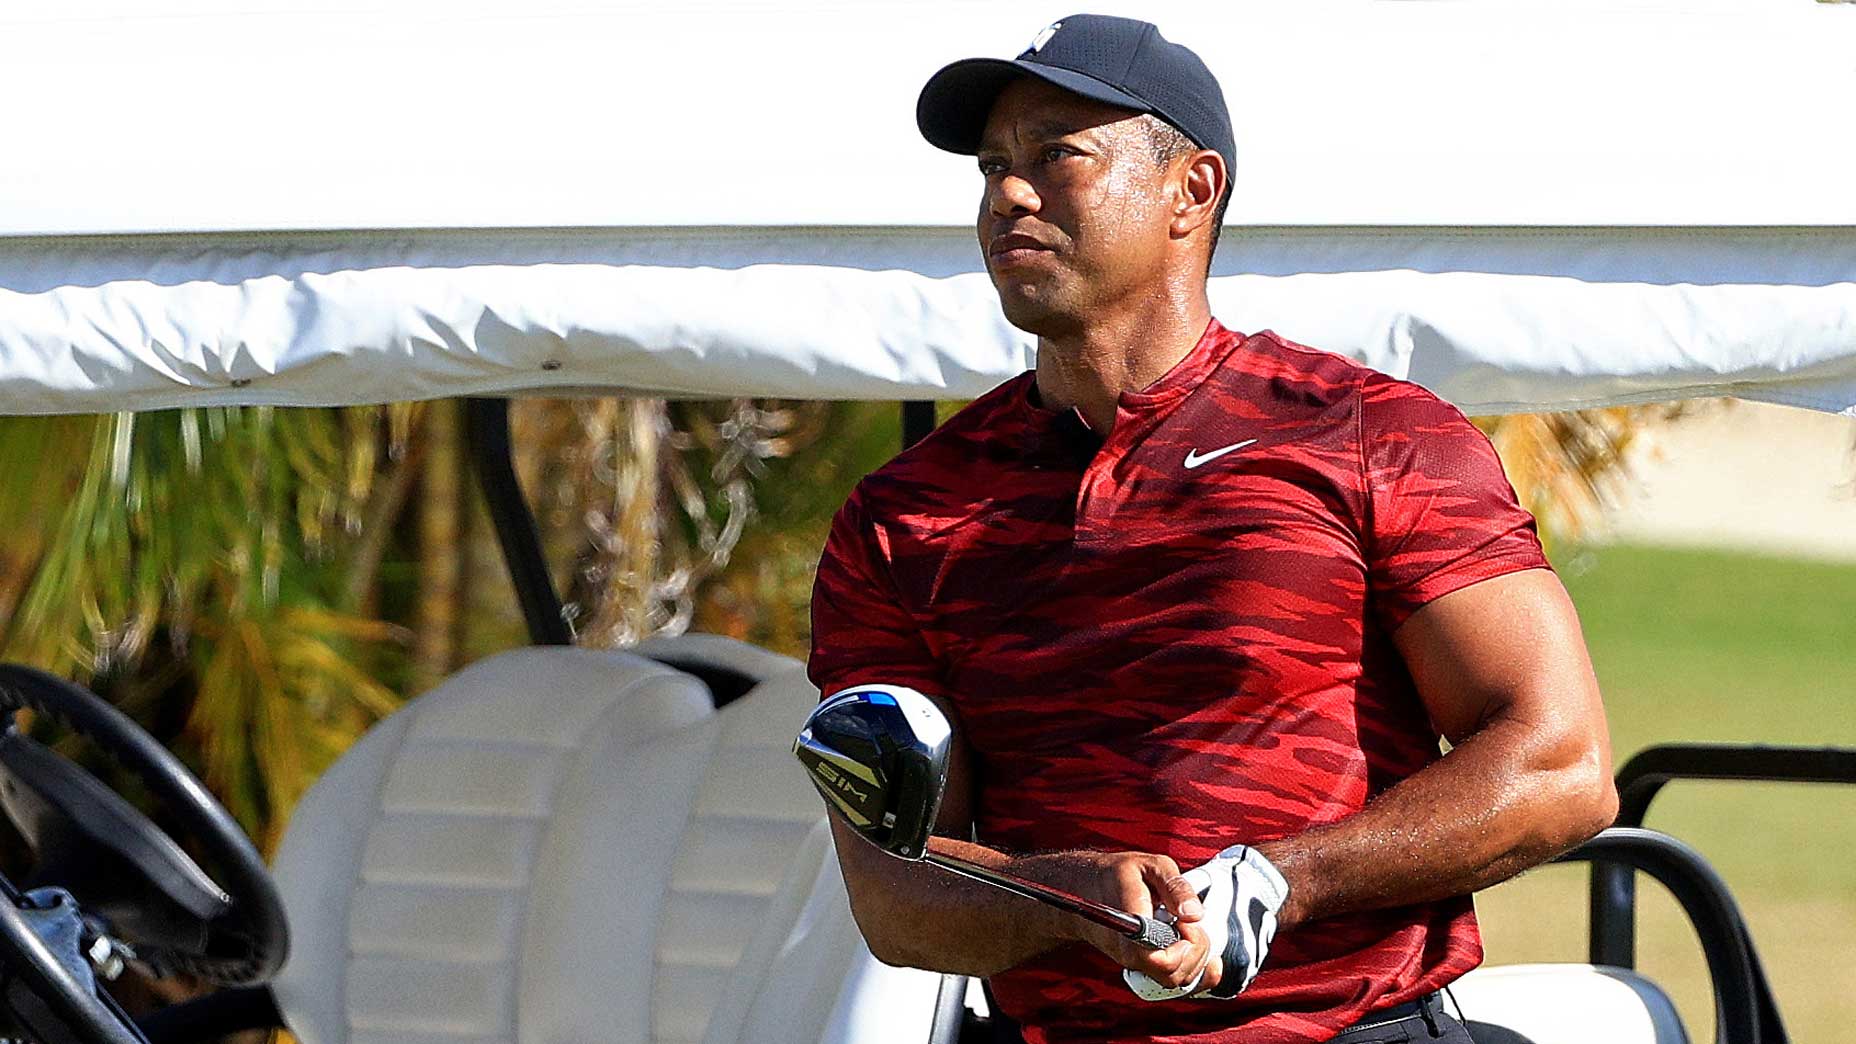 Tiger Woods injuries Explaining Tiger’s recovery from February car